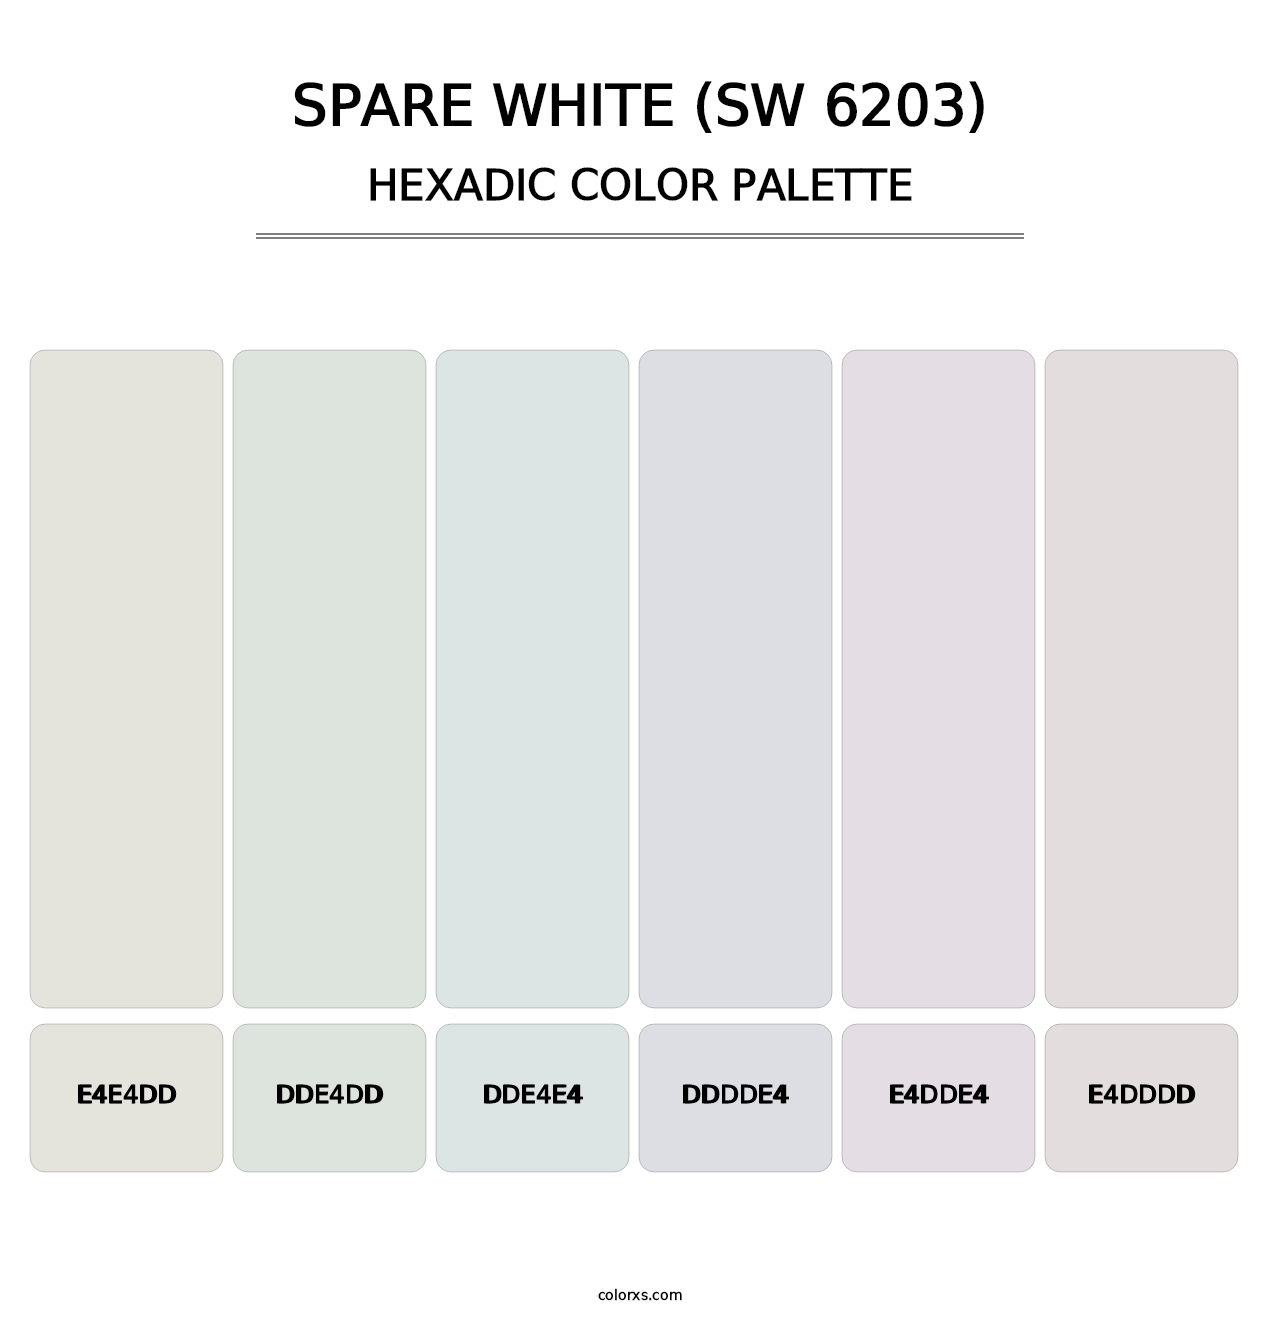 Spare White (SW 6203) - Hexadic Color Palette